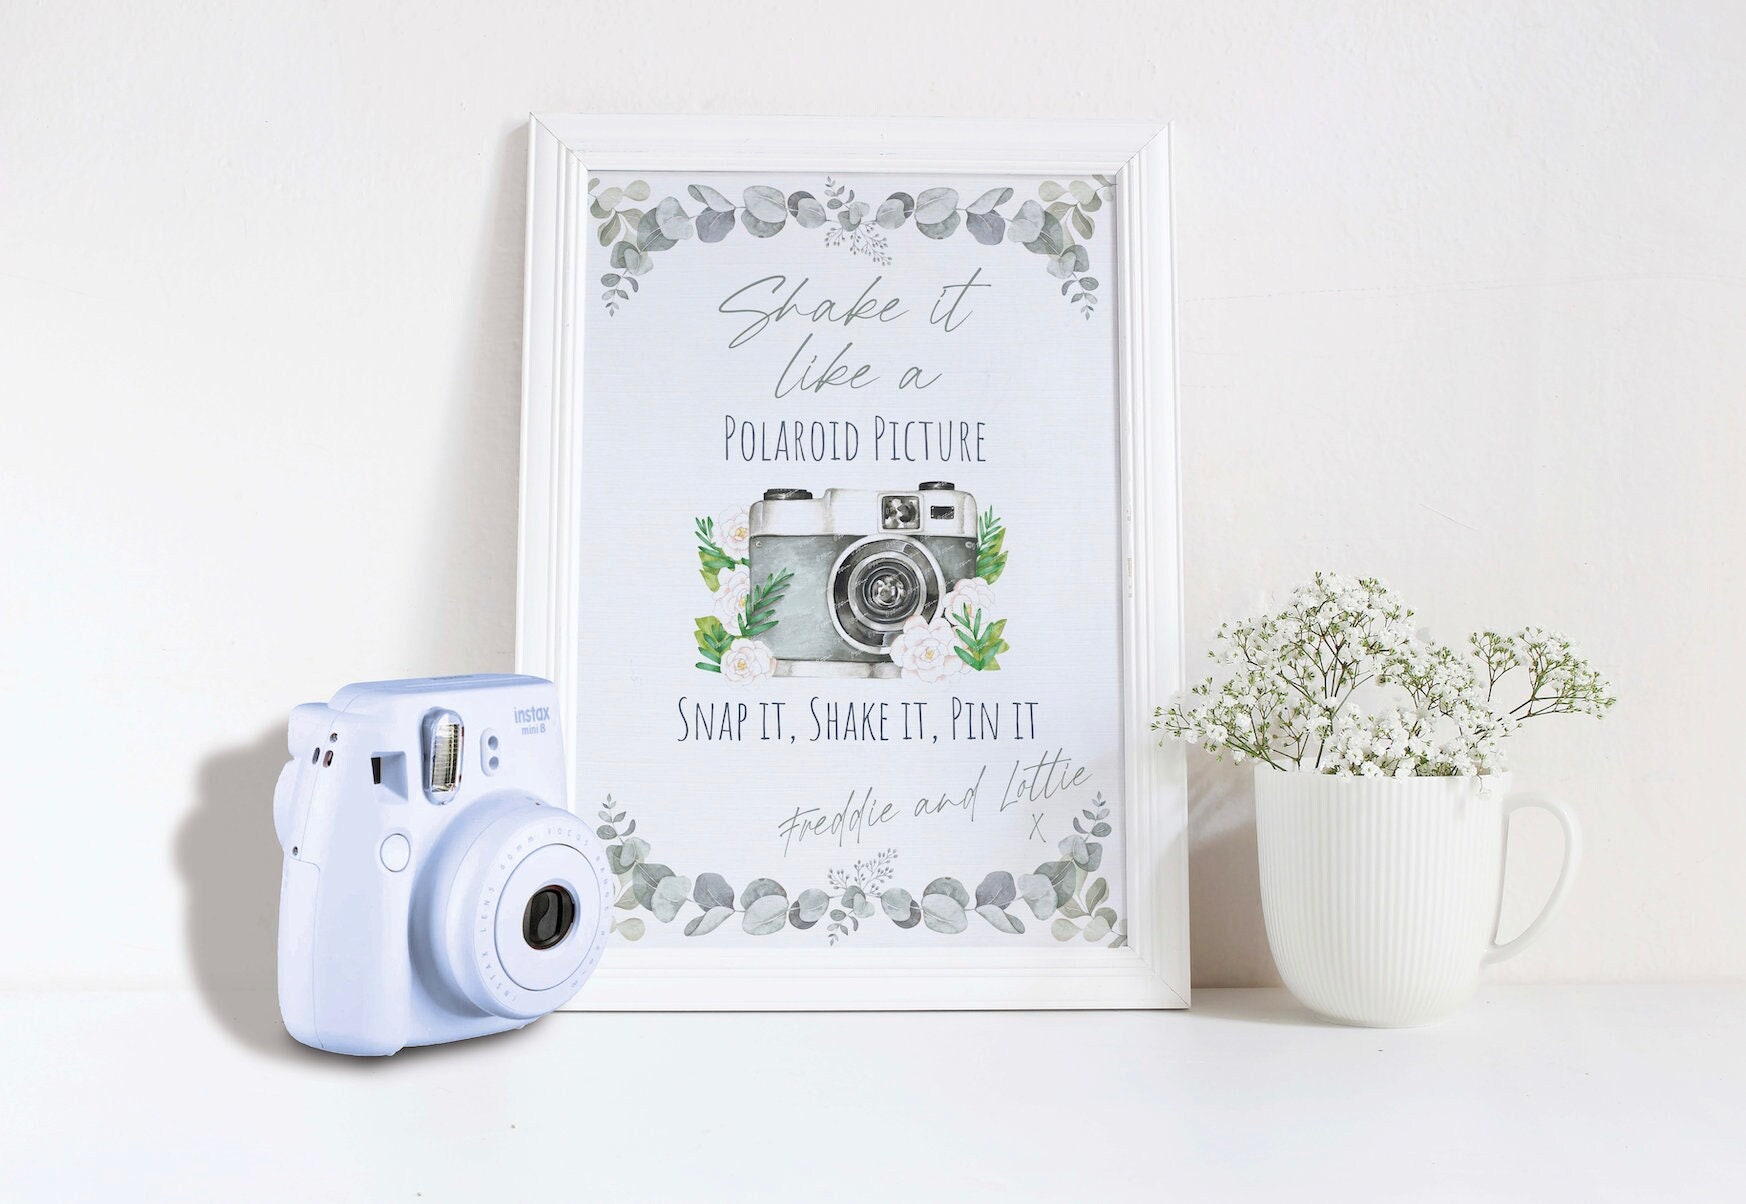 Polaroid Guestbook Sign Marketplace Wedding Signs by undefined